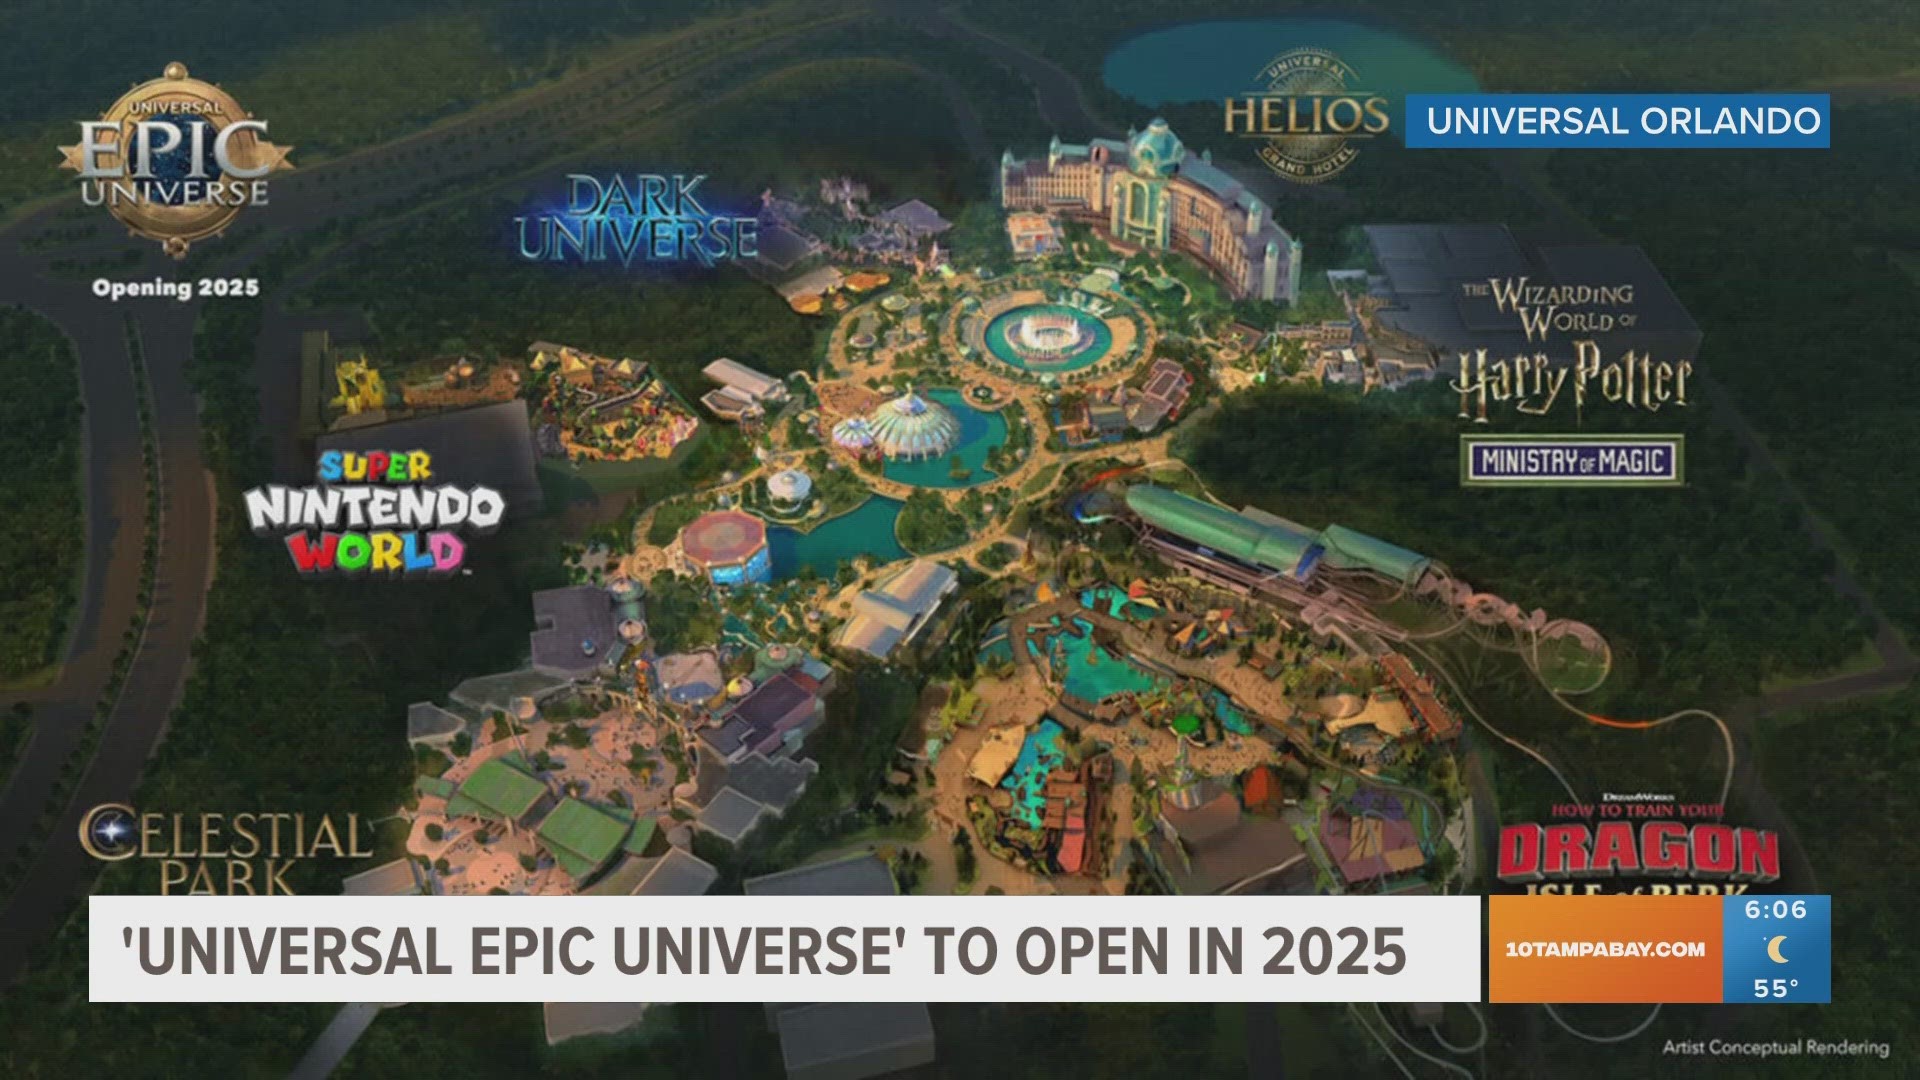 The new theme park is launching in 2025.